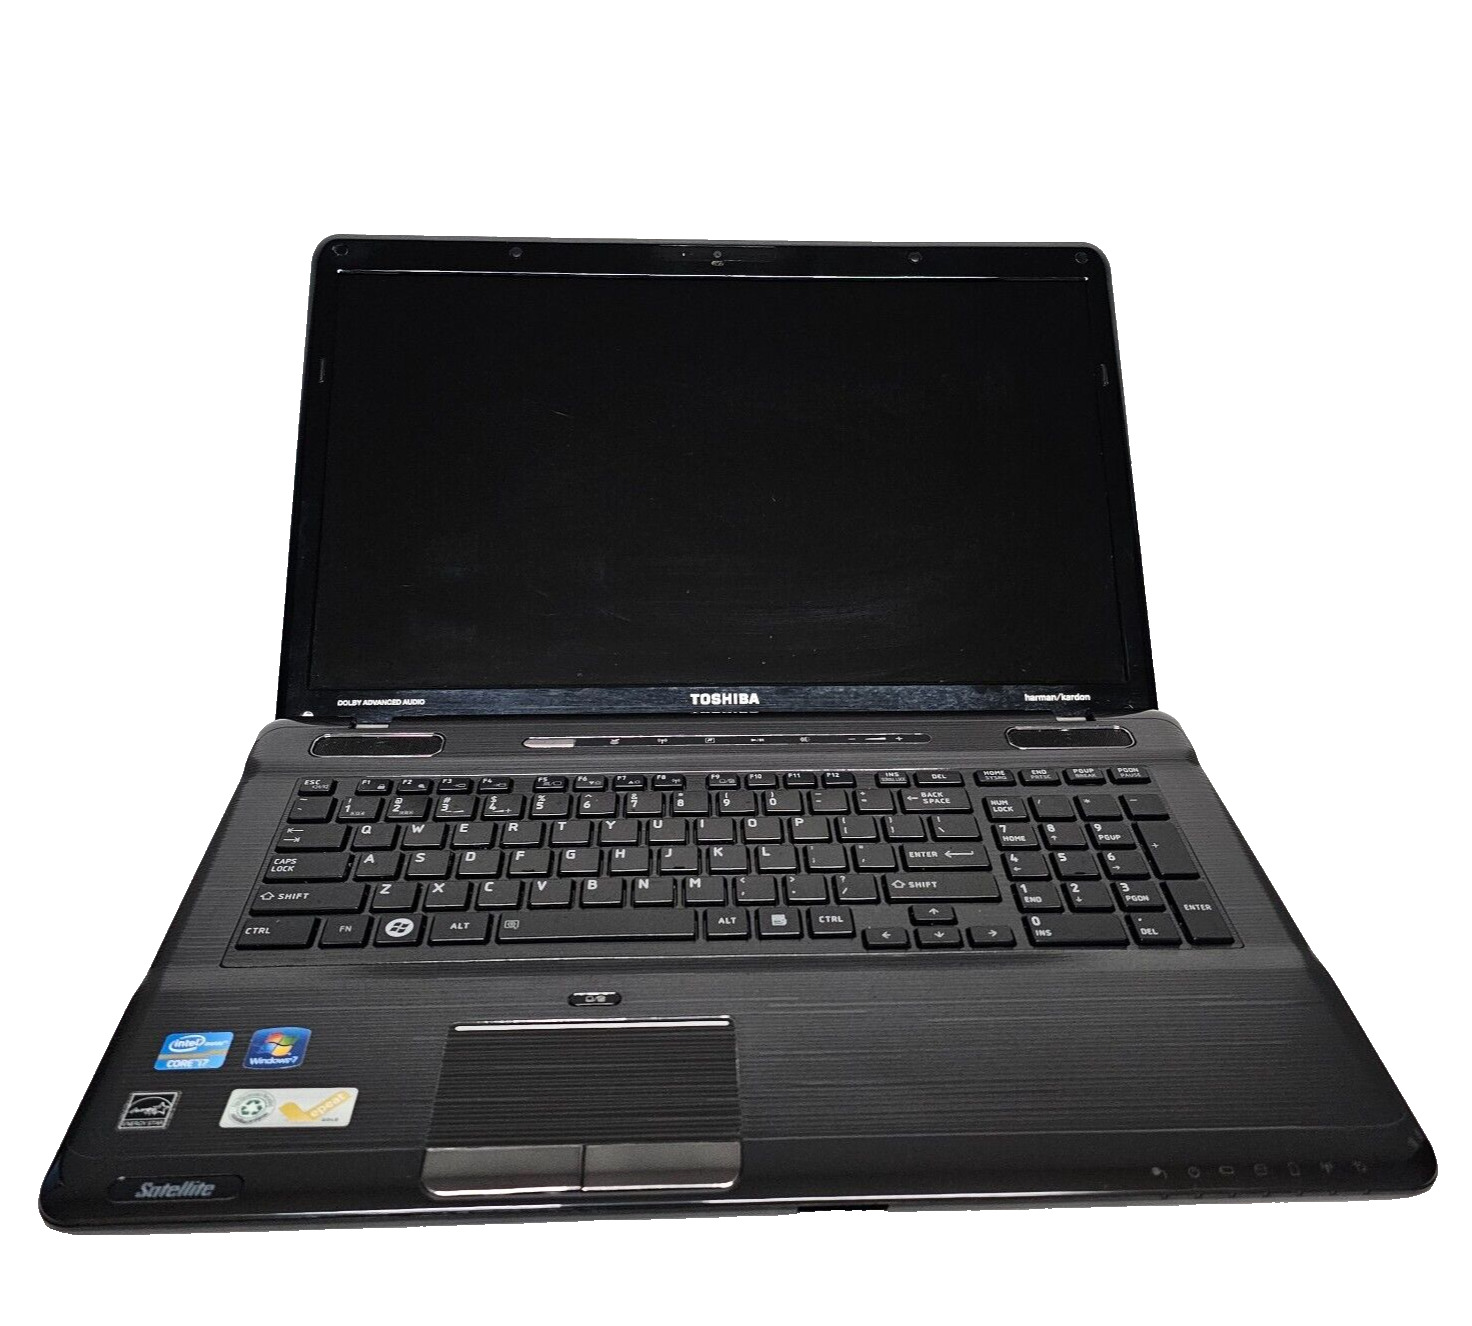 Toshiba Satellite P775-S7320 Laptop | Intel i7 | 8GB Ram | No HDD For Parts L2